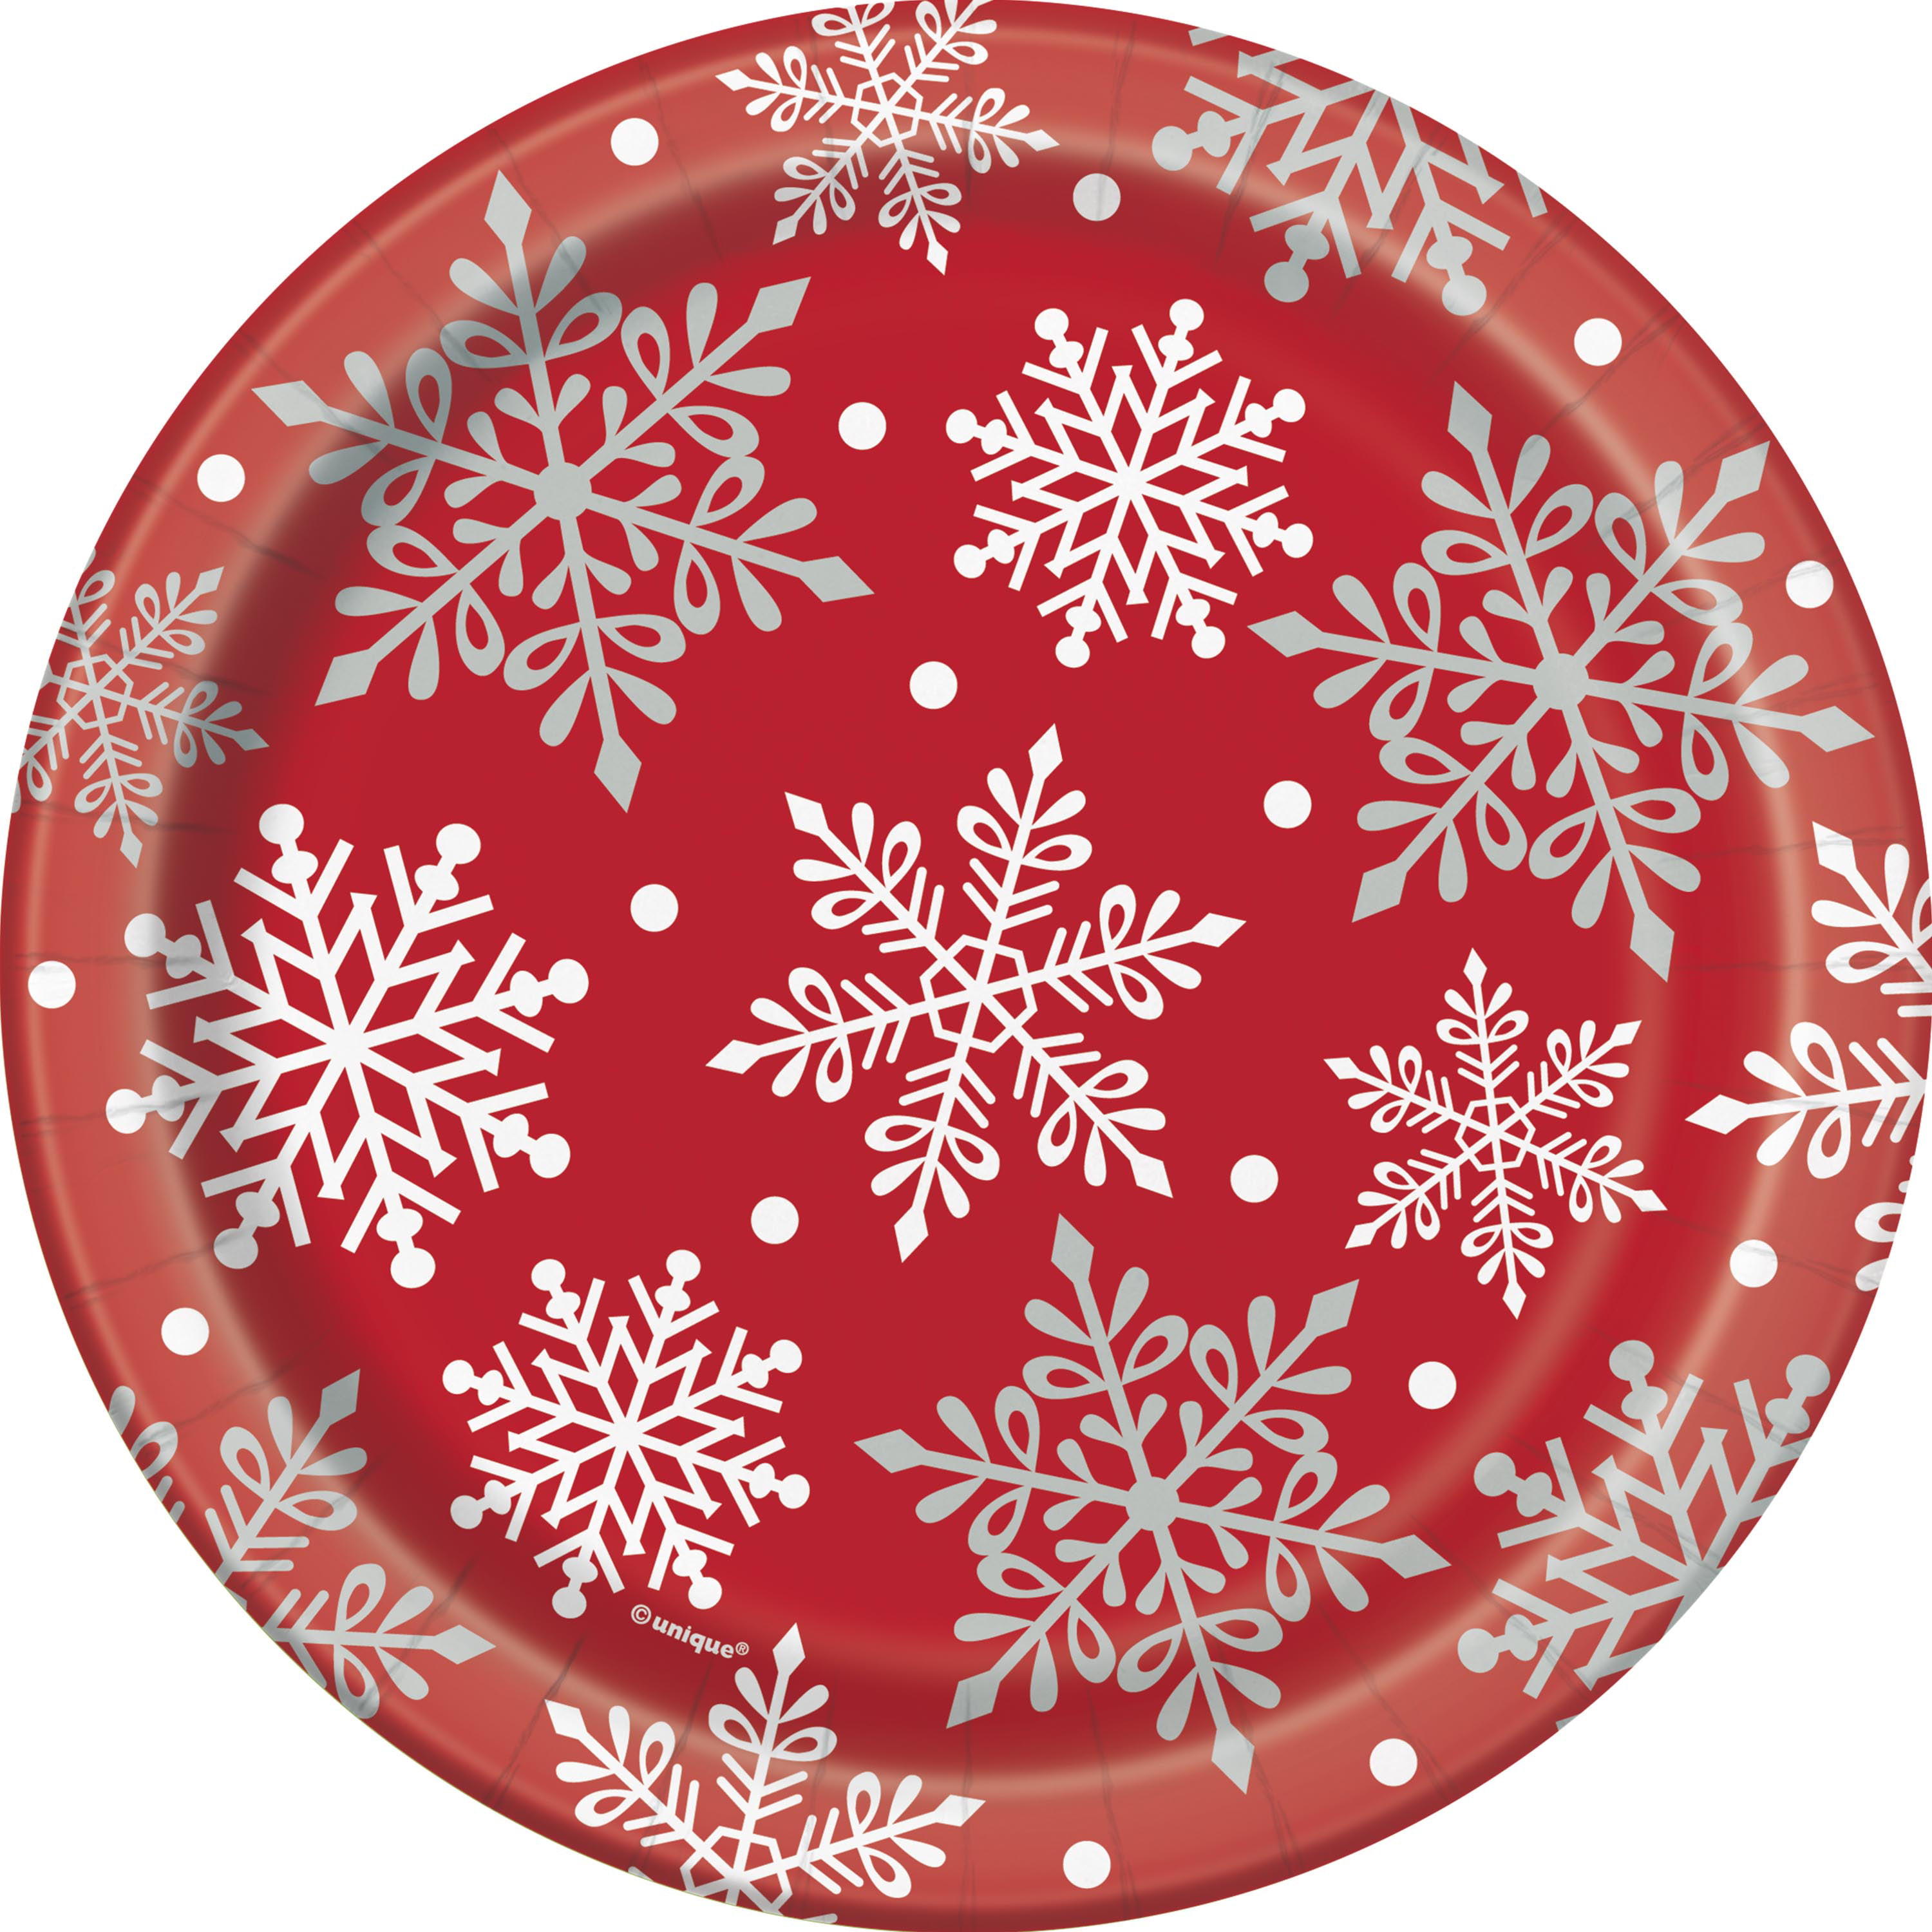 Snowflakes Holiday Paper Dessert Plates, 7in, 90ct - Walmart.com